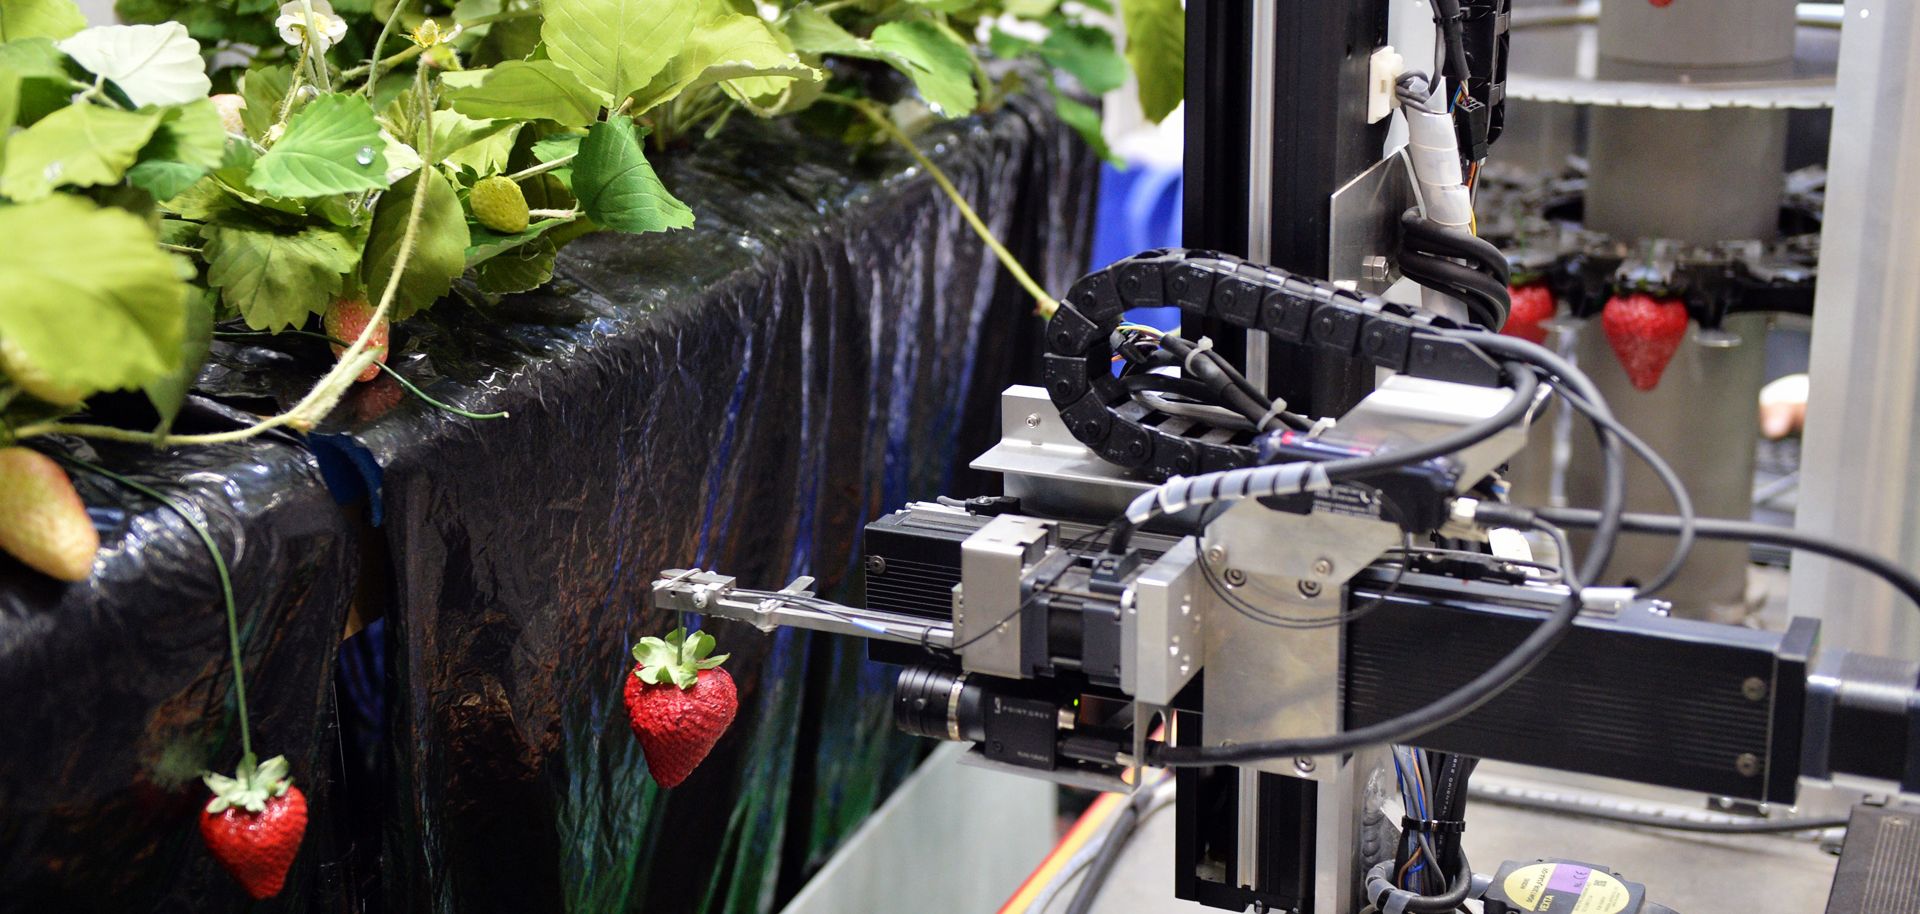 Japan's Utsunomiya University displays a strawberry-harvesting robot at the annual International Robot Exhibition in Tokyo in 2013. Robotics will become more important in the U.S. agricultural sector as labor costs rise and technological advancements become more affordable.